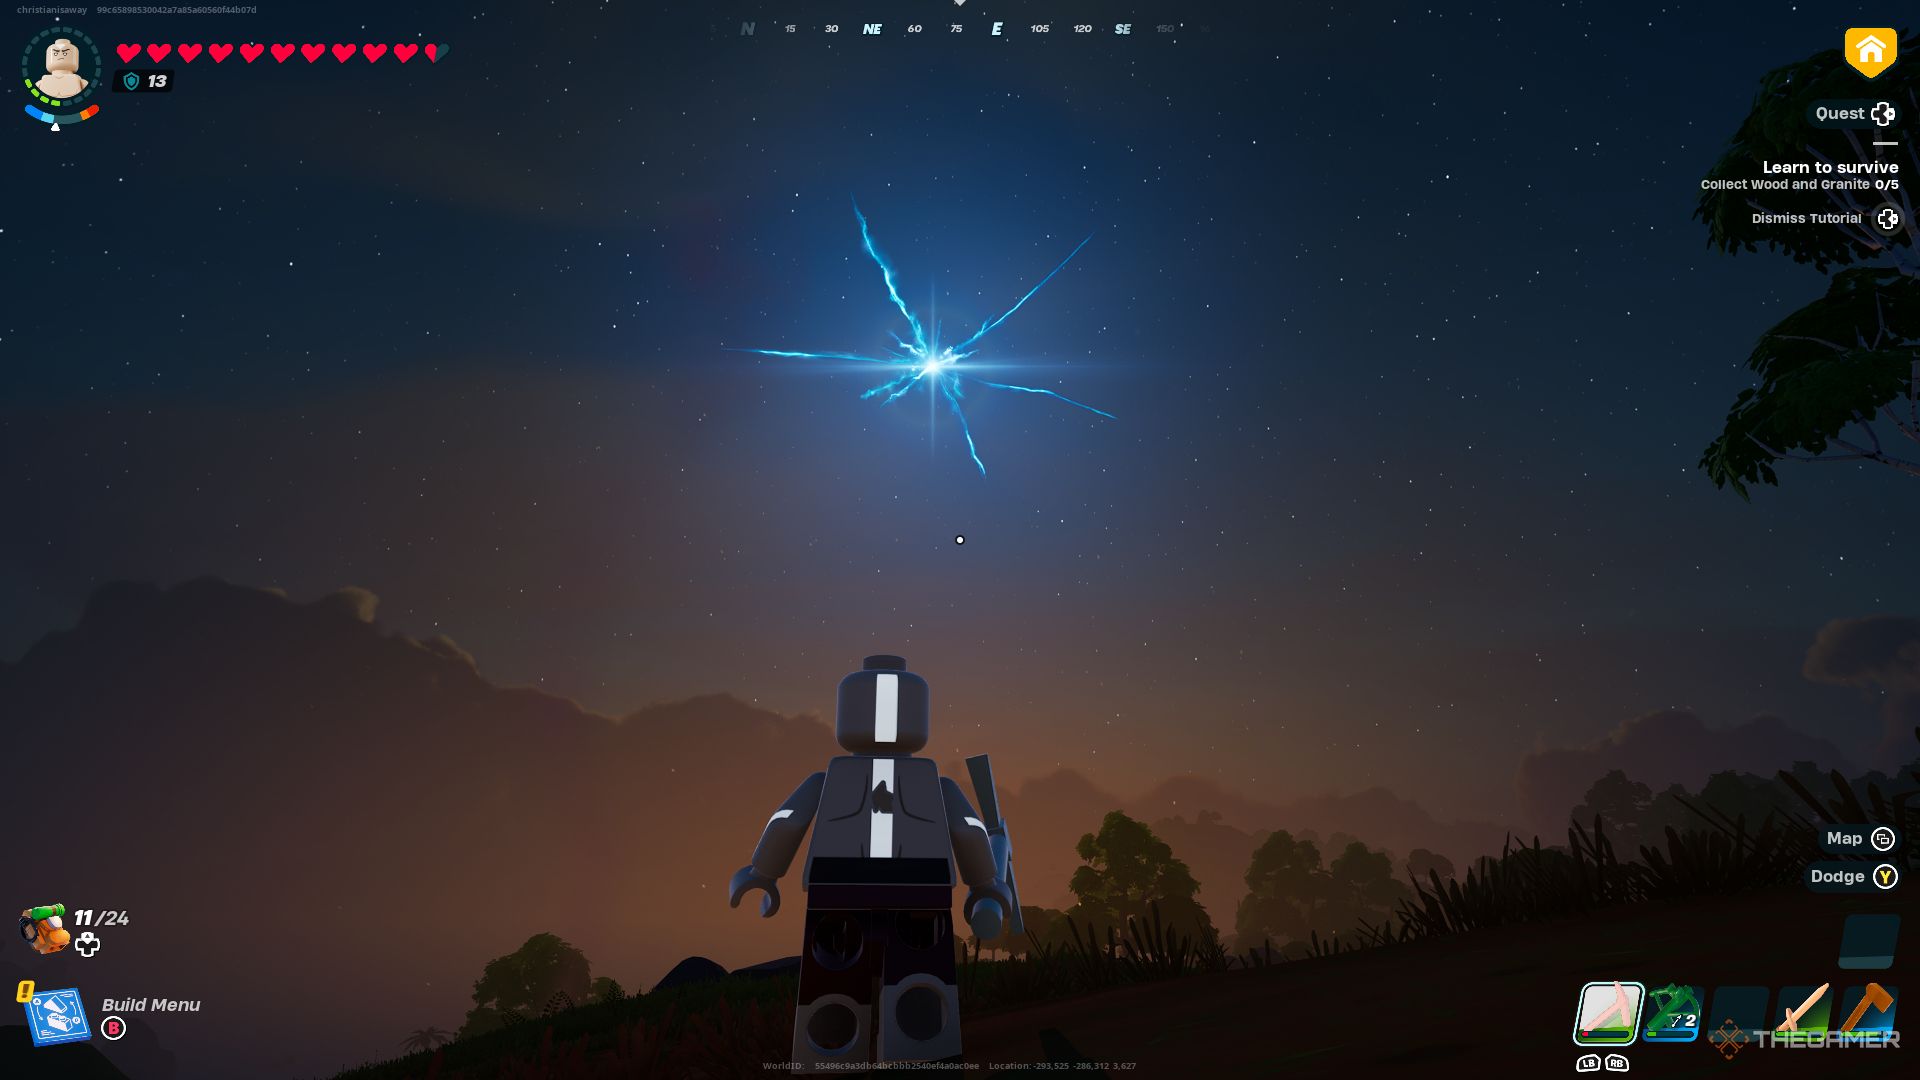 A screenshot from Lego Fortnite showing the player character as Avatar Aang watching a large rift appear in the sky overhead during the night.